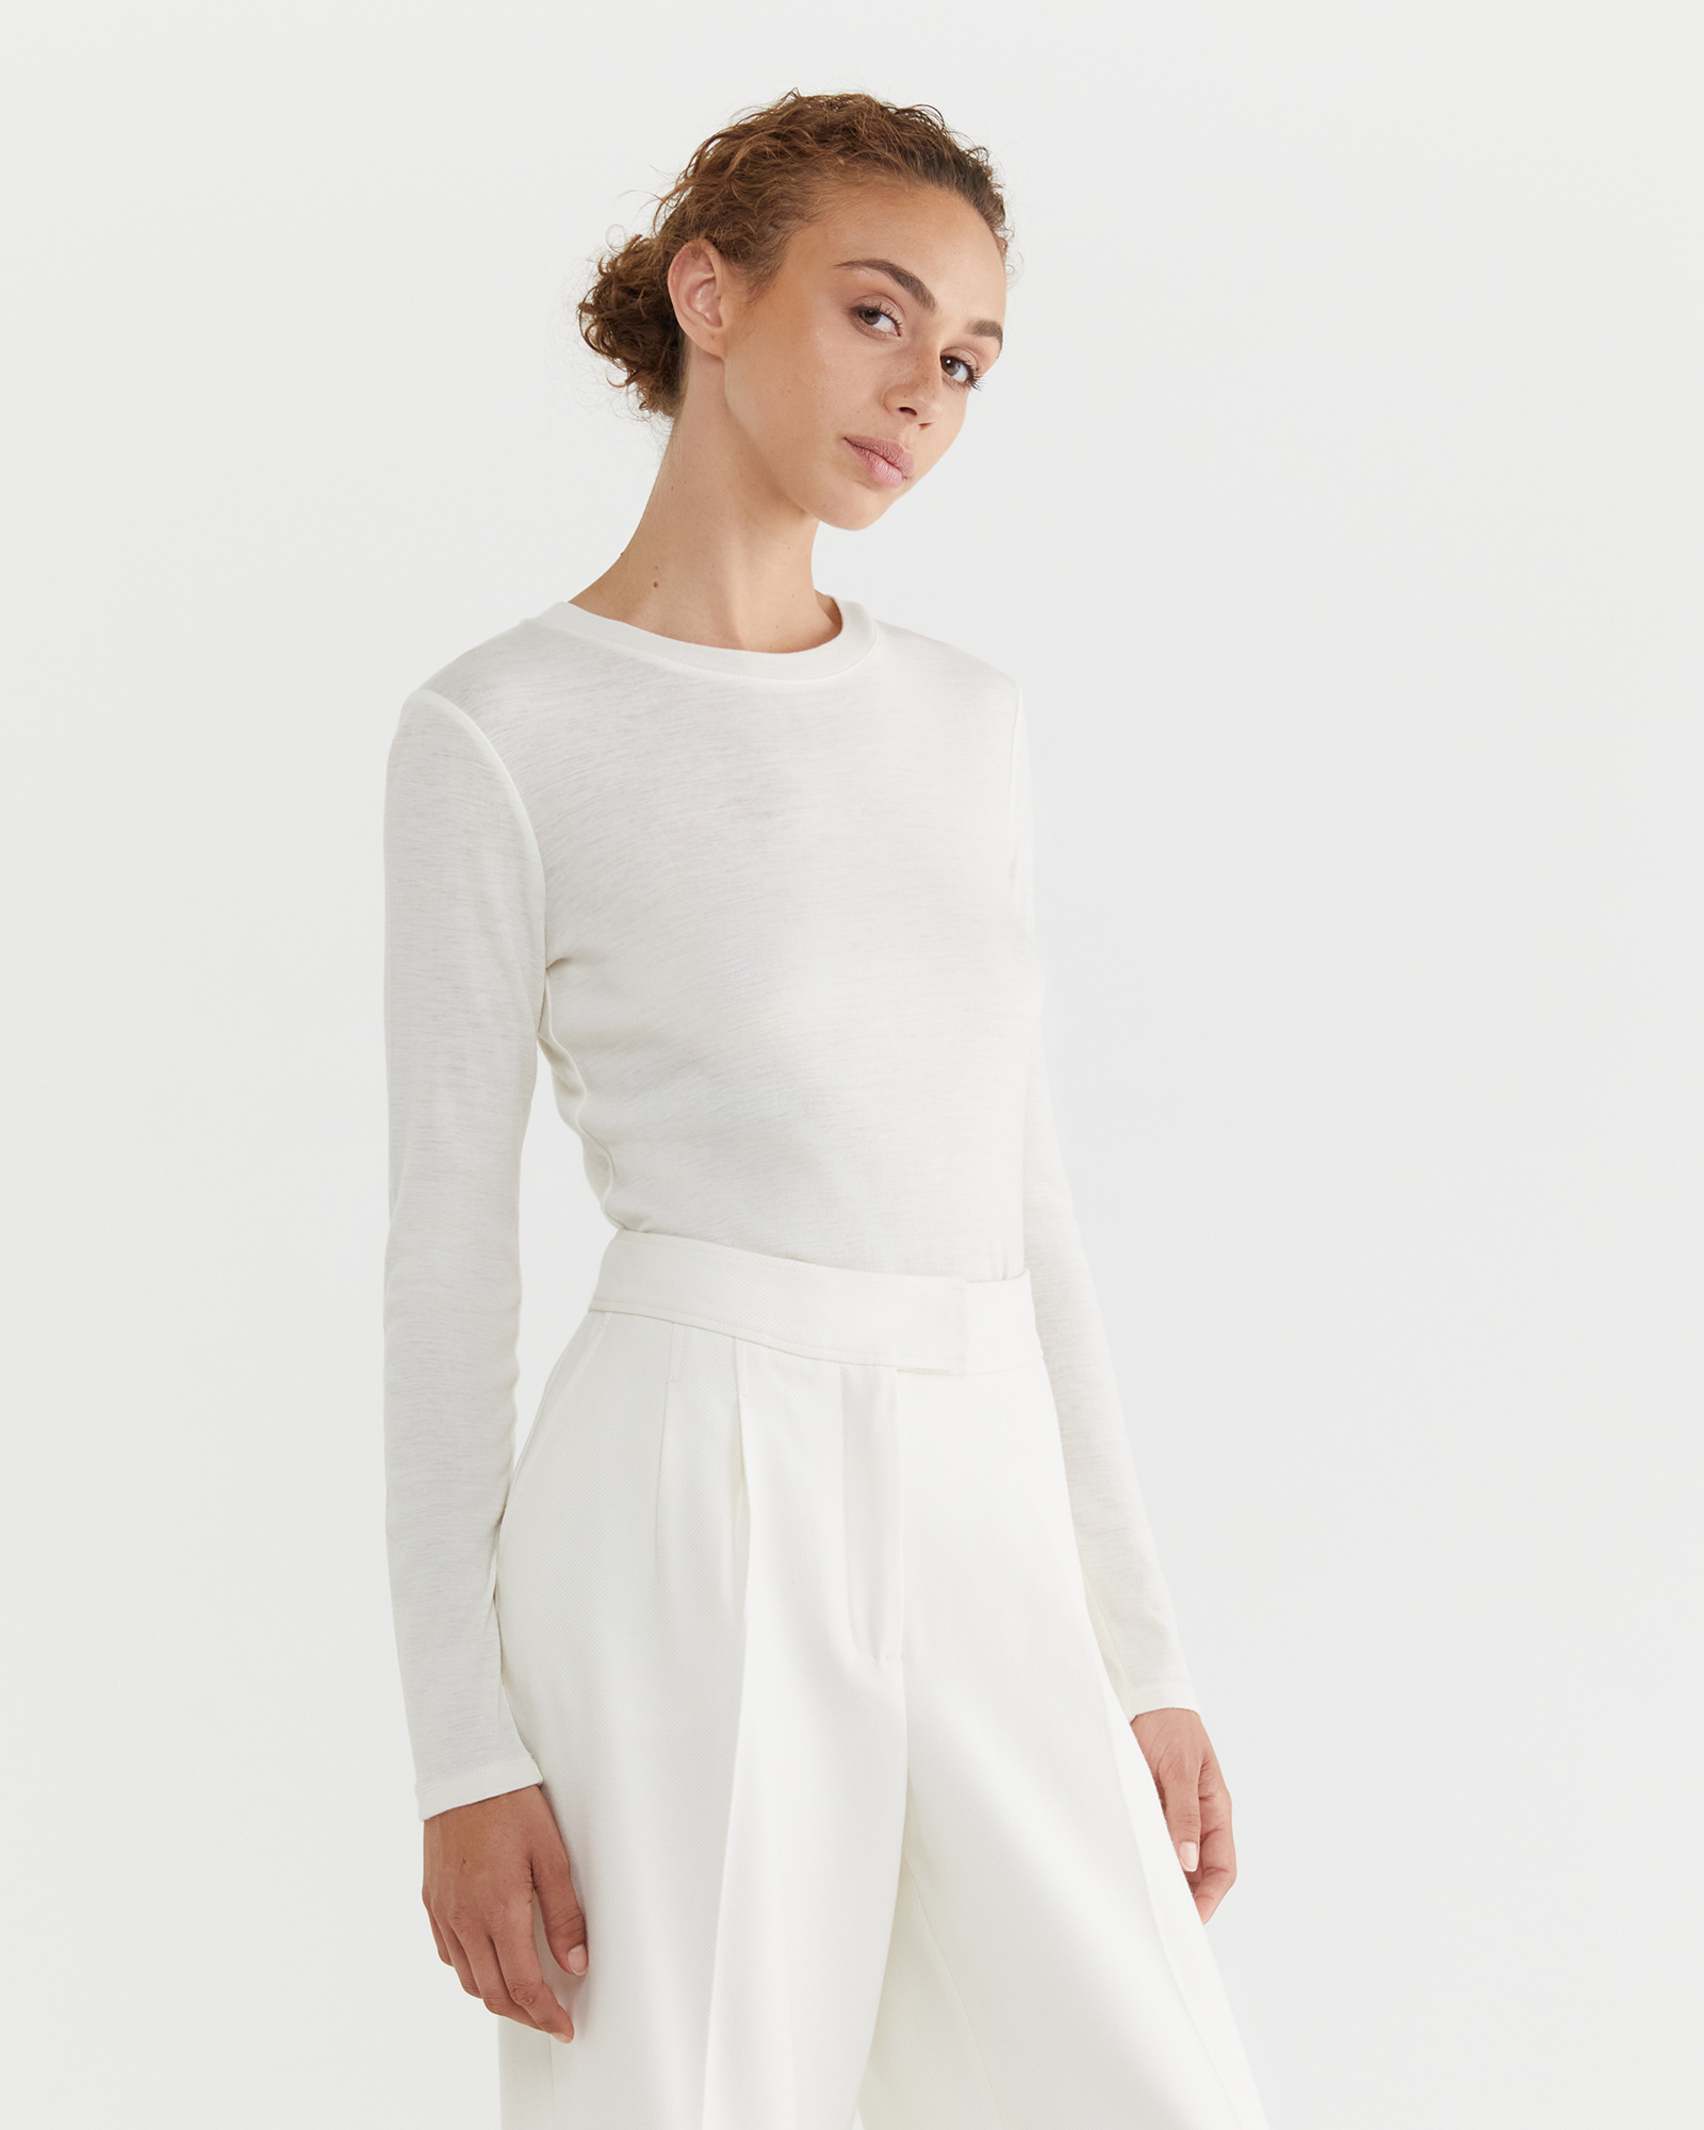 Addison Baby Wool Top in IVORY